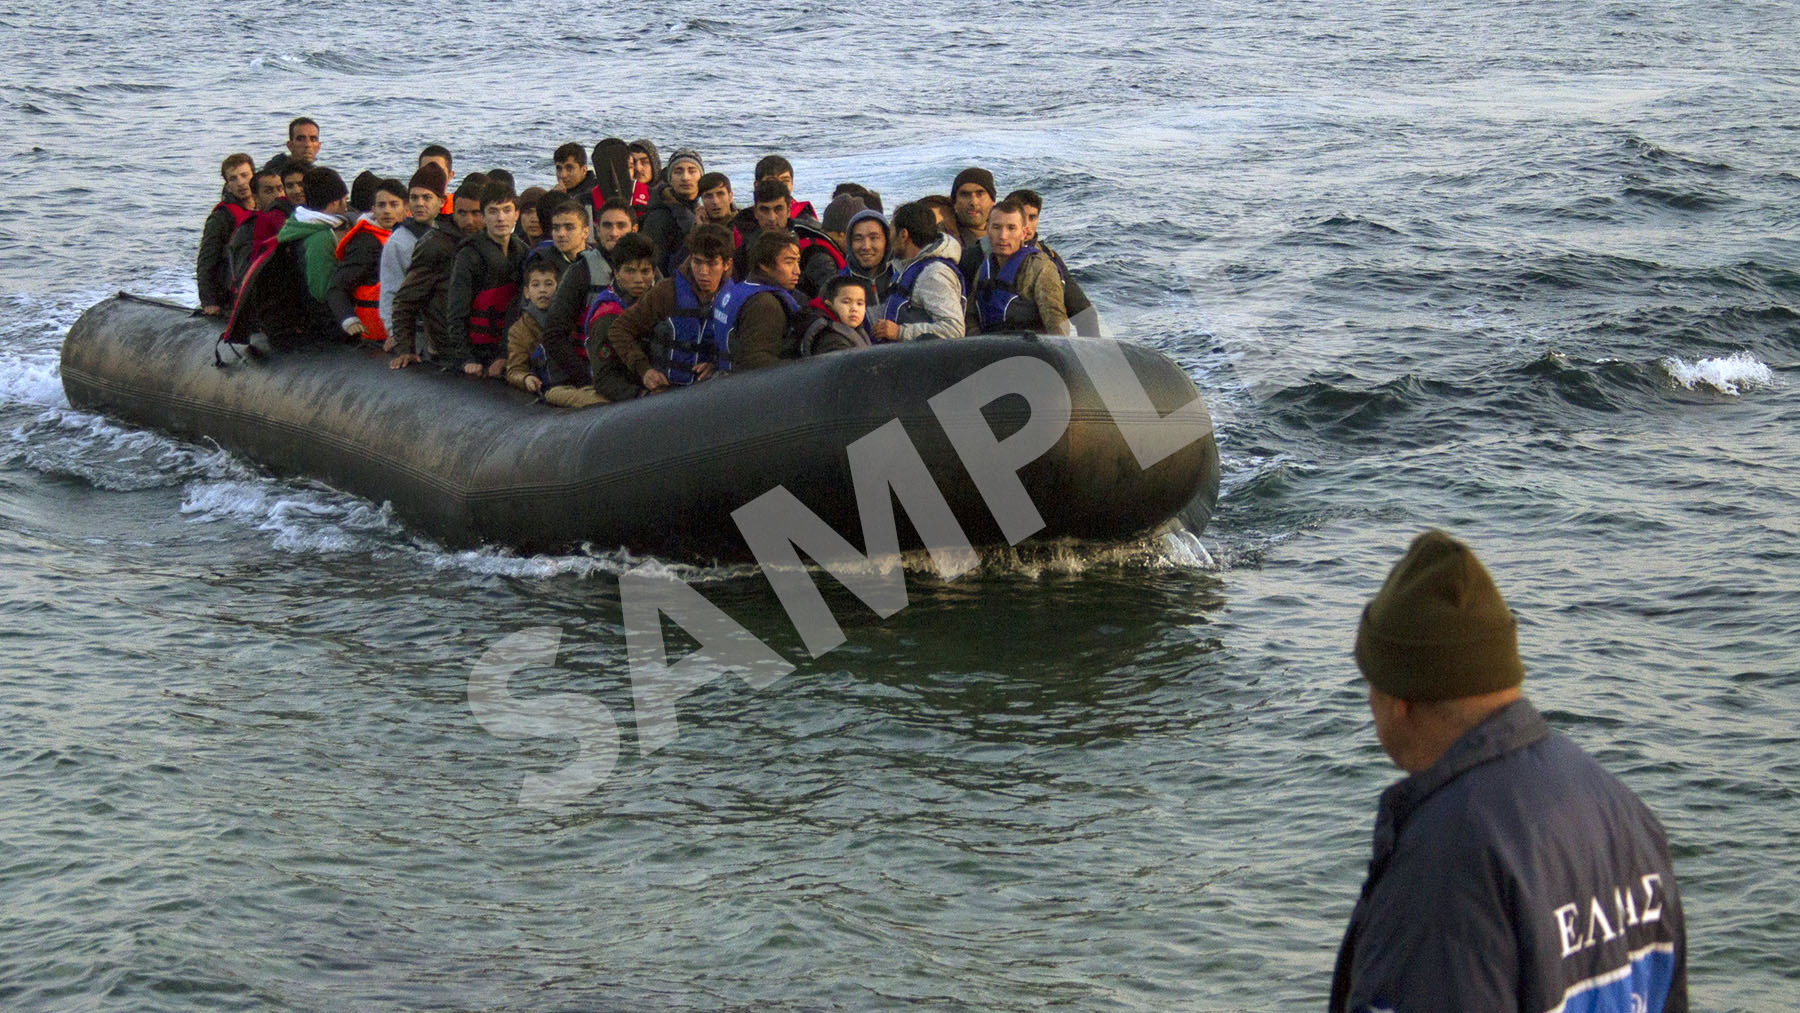 Refugees in a crowded raft arrive on the shores of Lesbos, Greece.